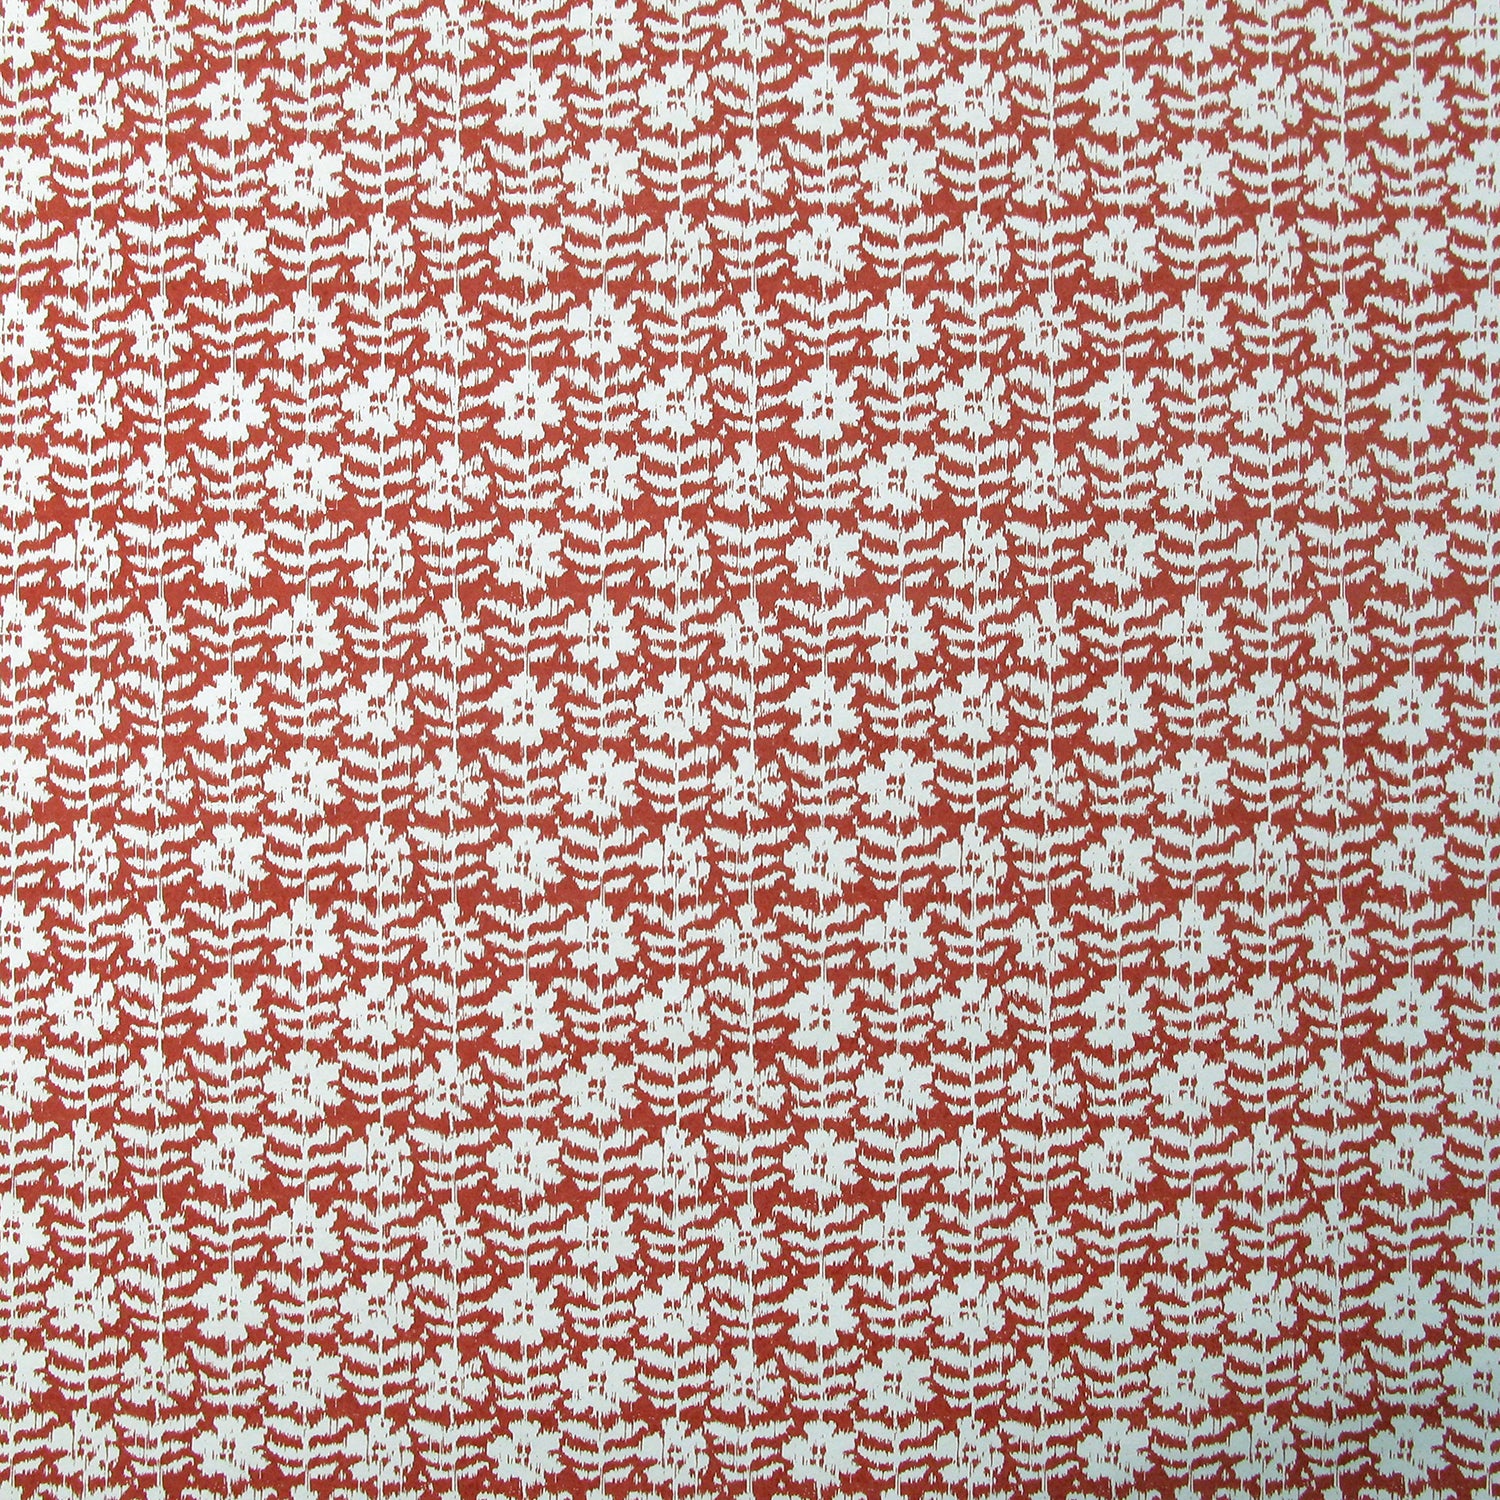 Detail of wallpaper in a floral grid print in white on a red field.